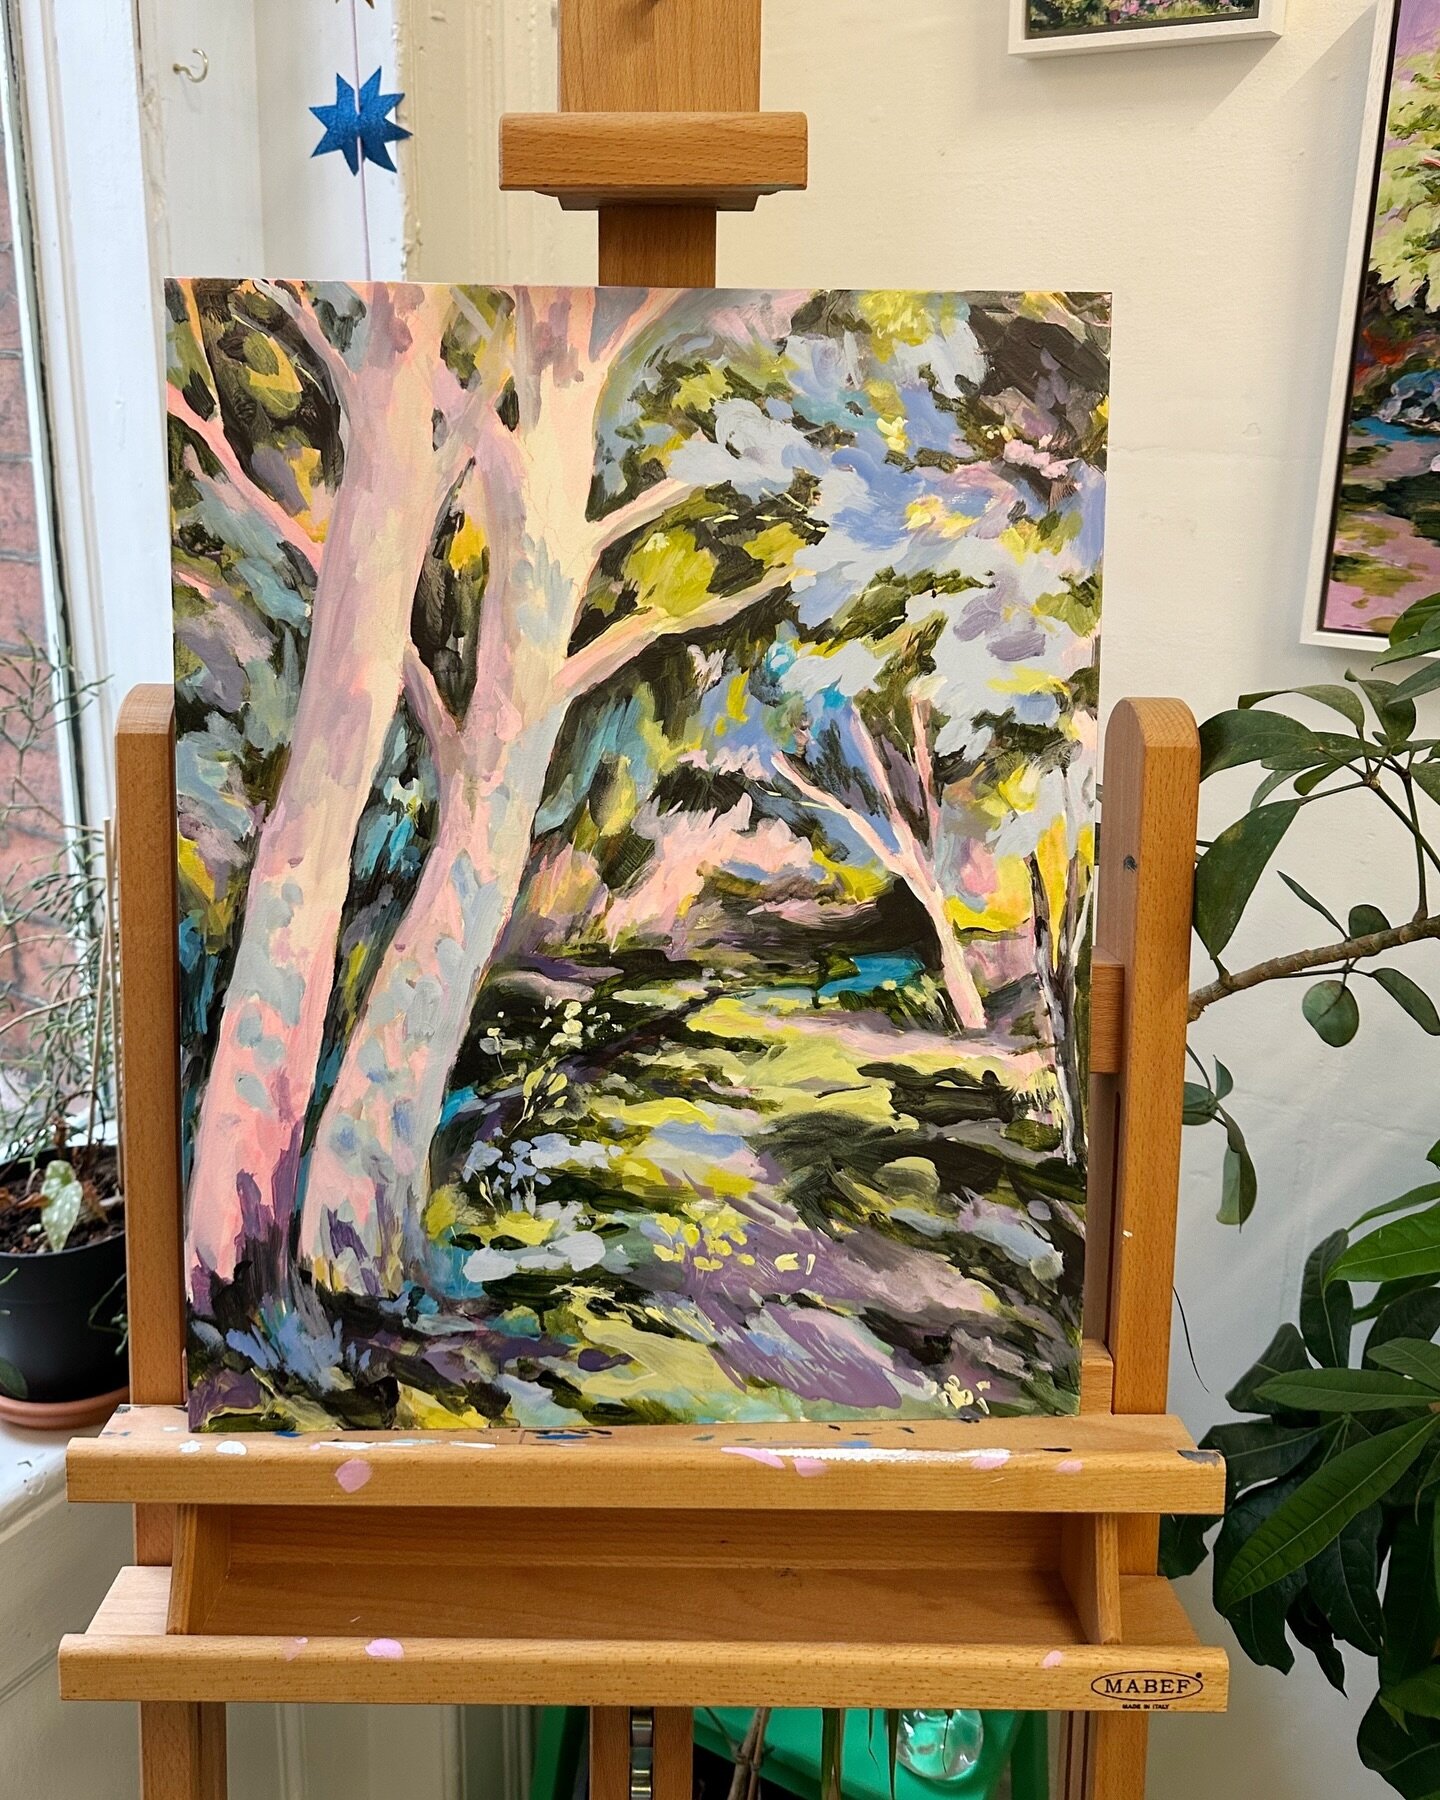 Trees from this weekend 🤍🩵

As yet untitled - Acrylic on board 

#impressionistart #impressionistpainting #britishartist #emergingartist #delphianopencall @delphiangallery #treepainting #colourfulart #colourlovers